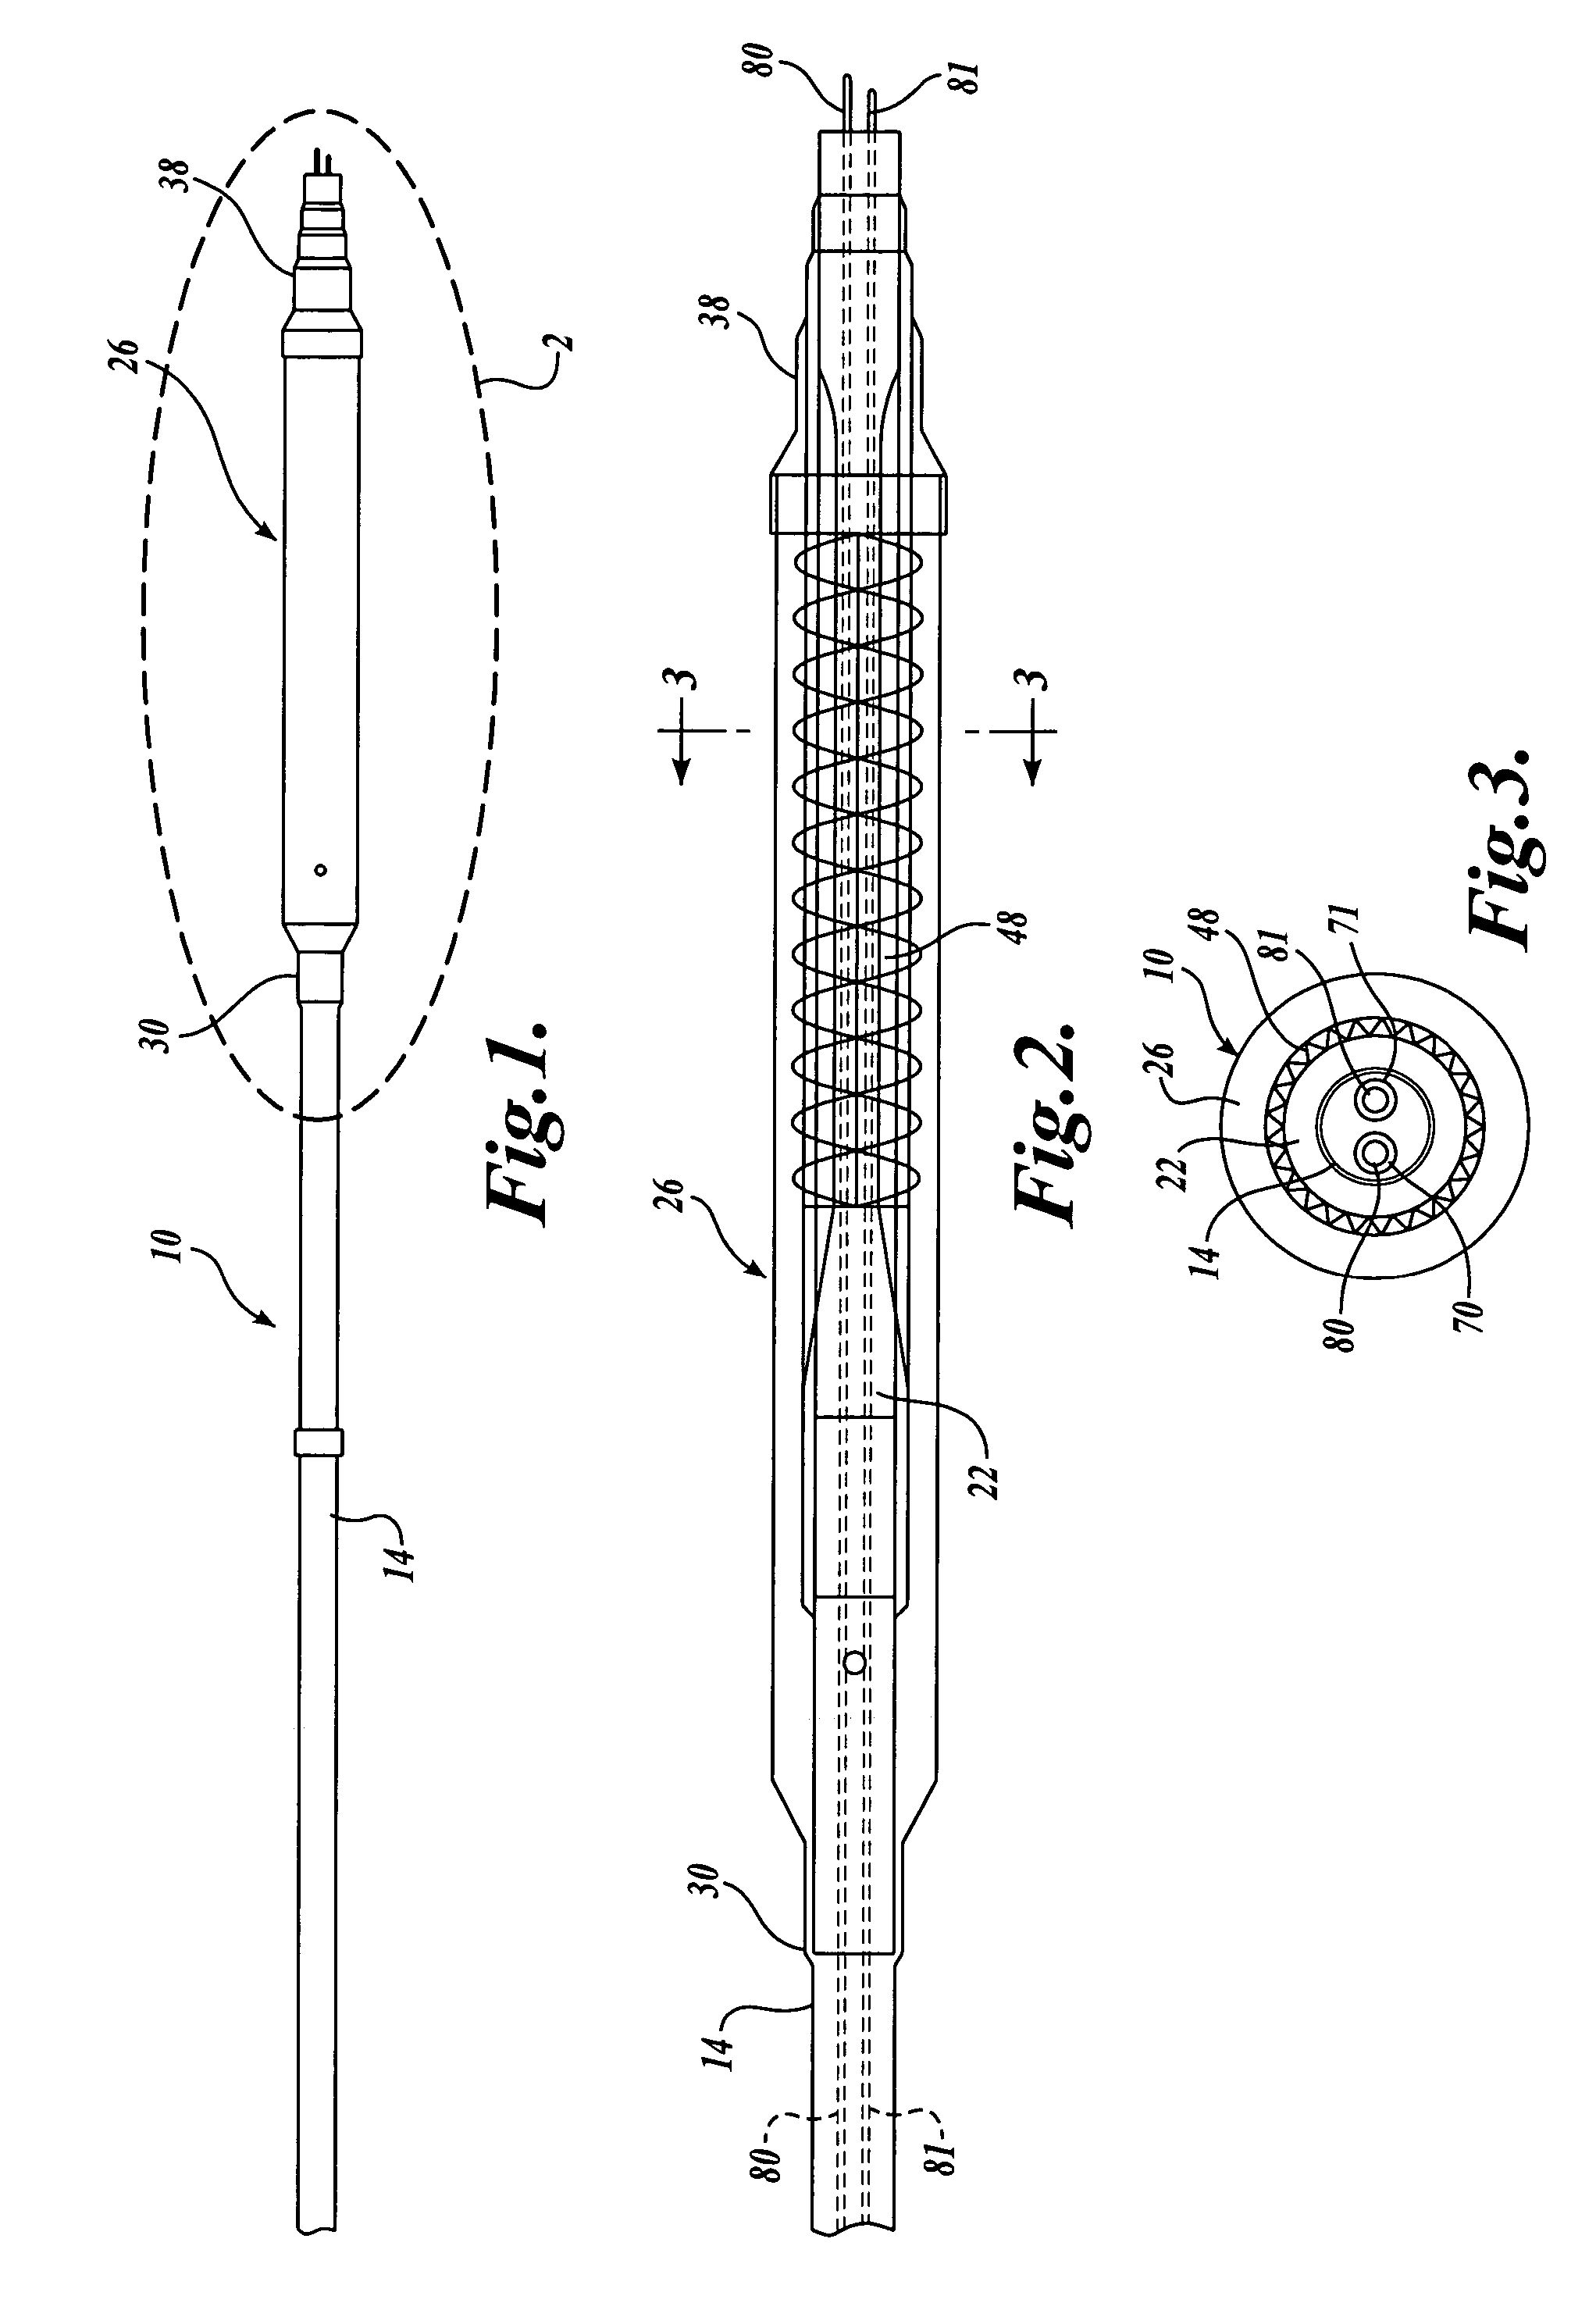 Stent delivery system with imaging capability